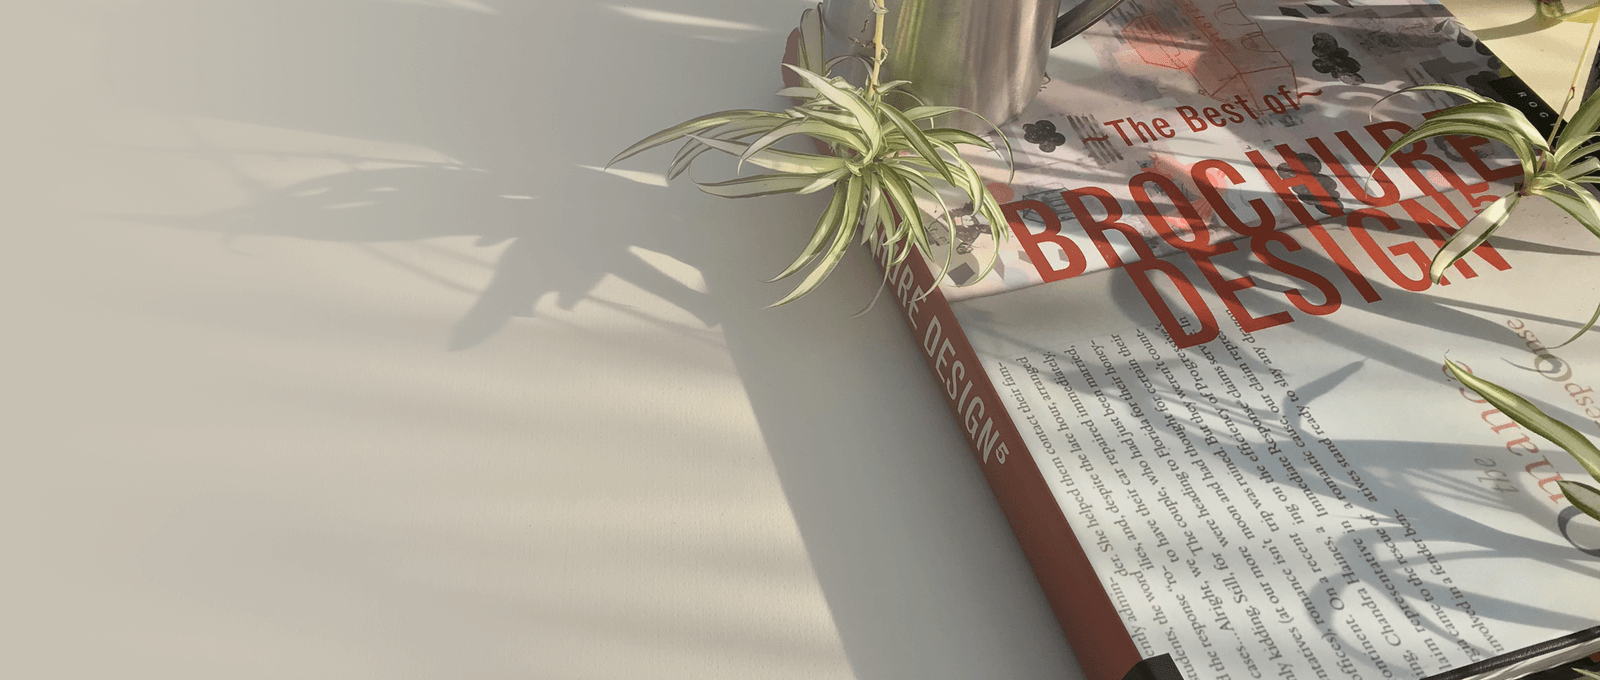 A book on design in a serene setting, with a cup of coffee and a plant, captures the beauty of morning sunlight